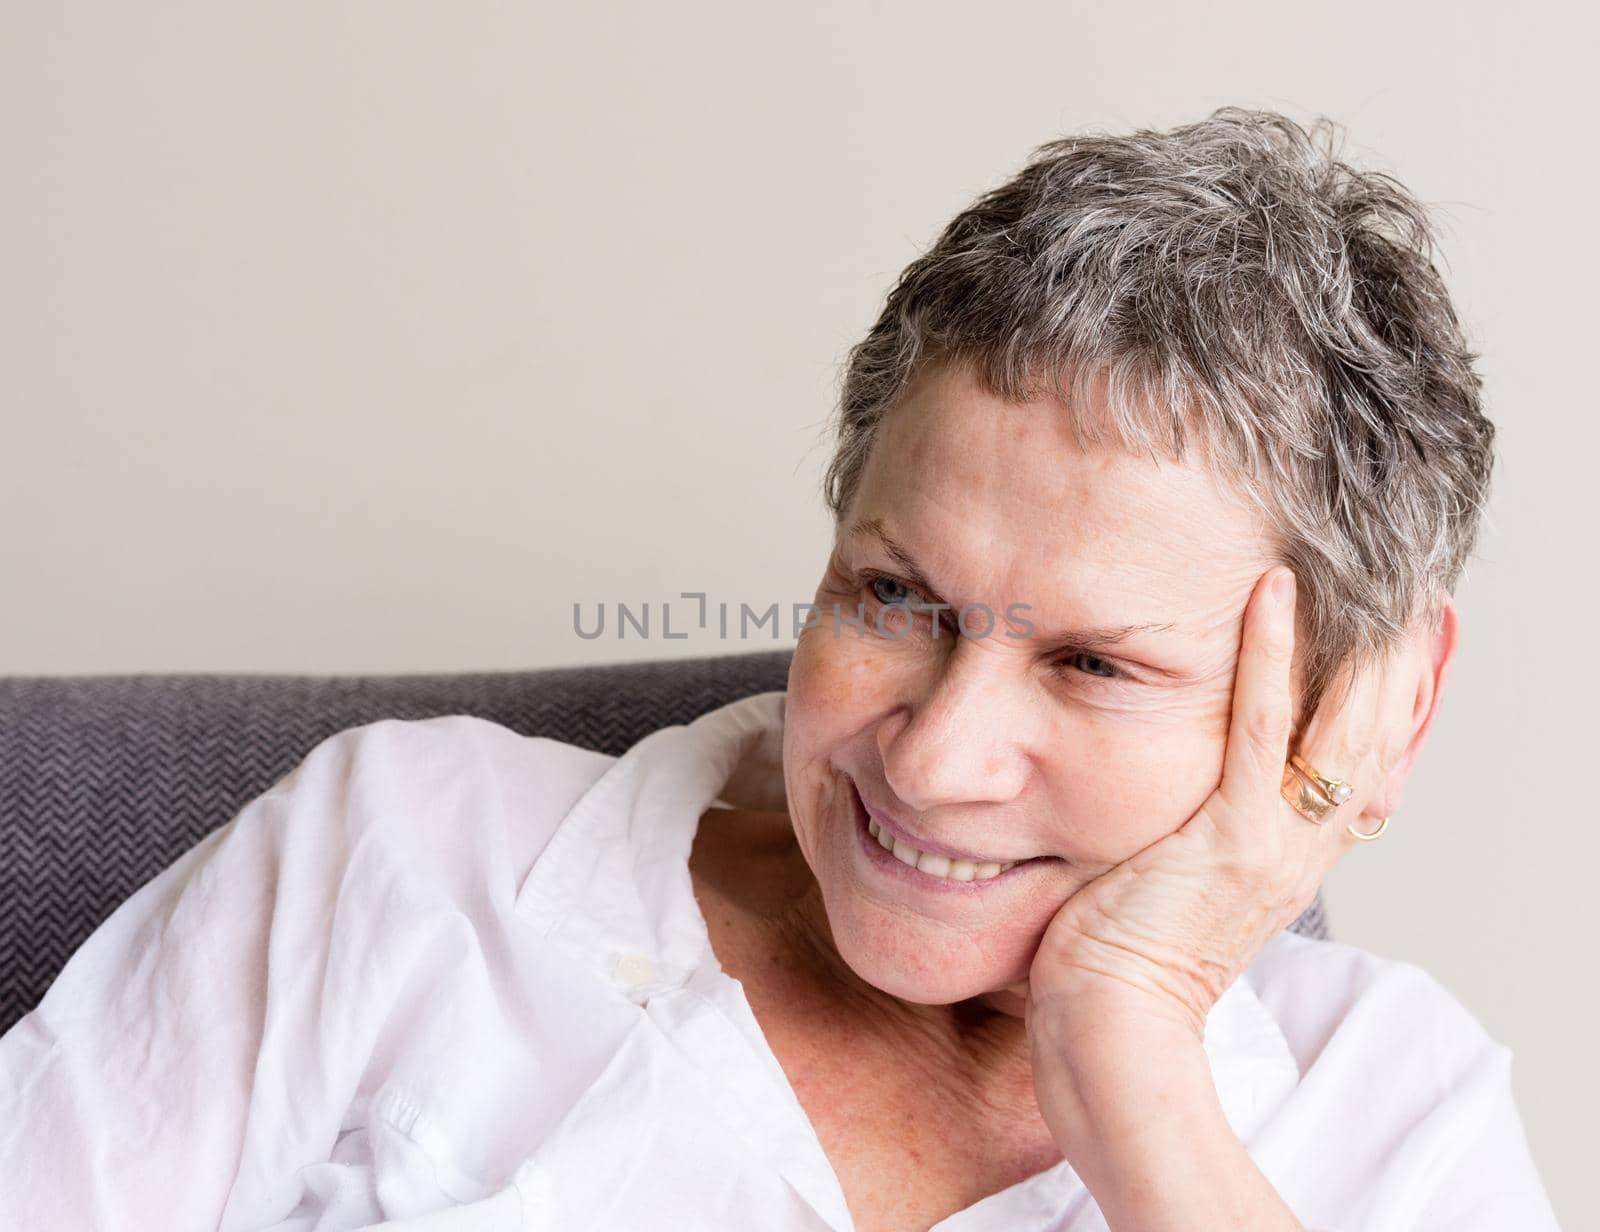 Older woman with short grey hair smiling with hand on head in relaxed position (selective focus)